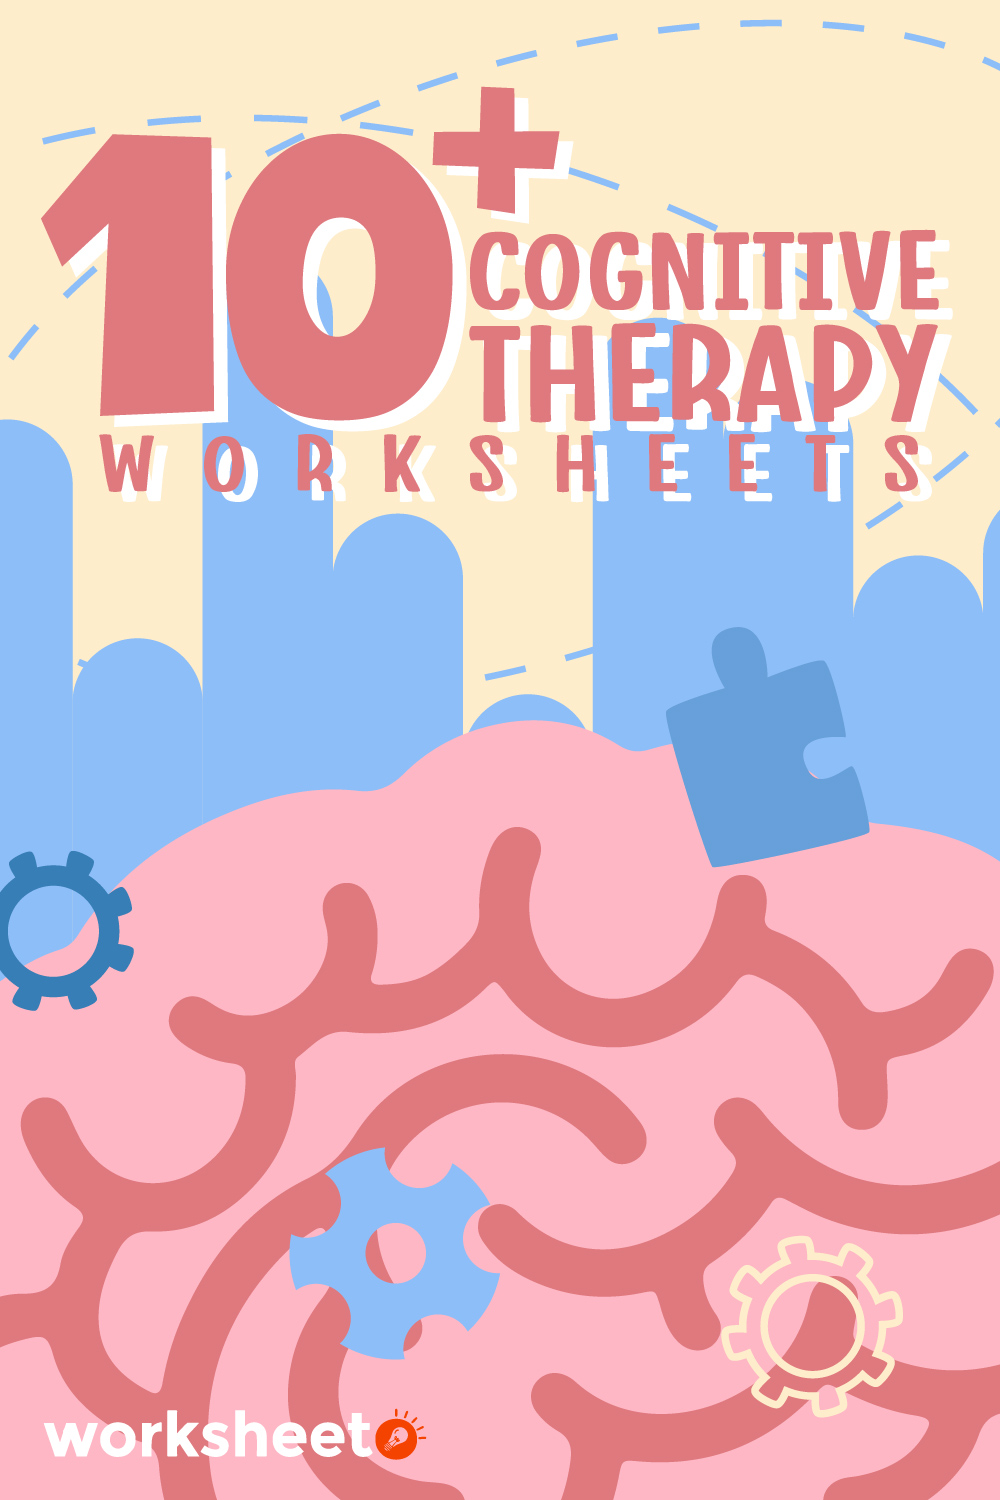 16 Images of Cognitive Therapy Worksheets